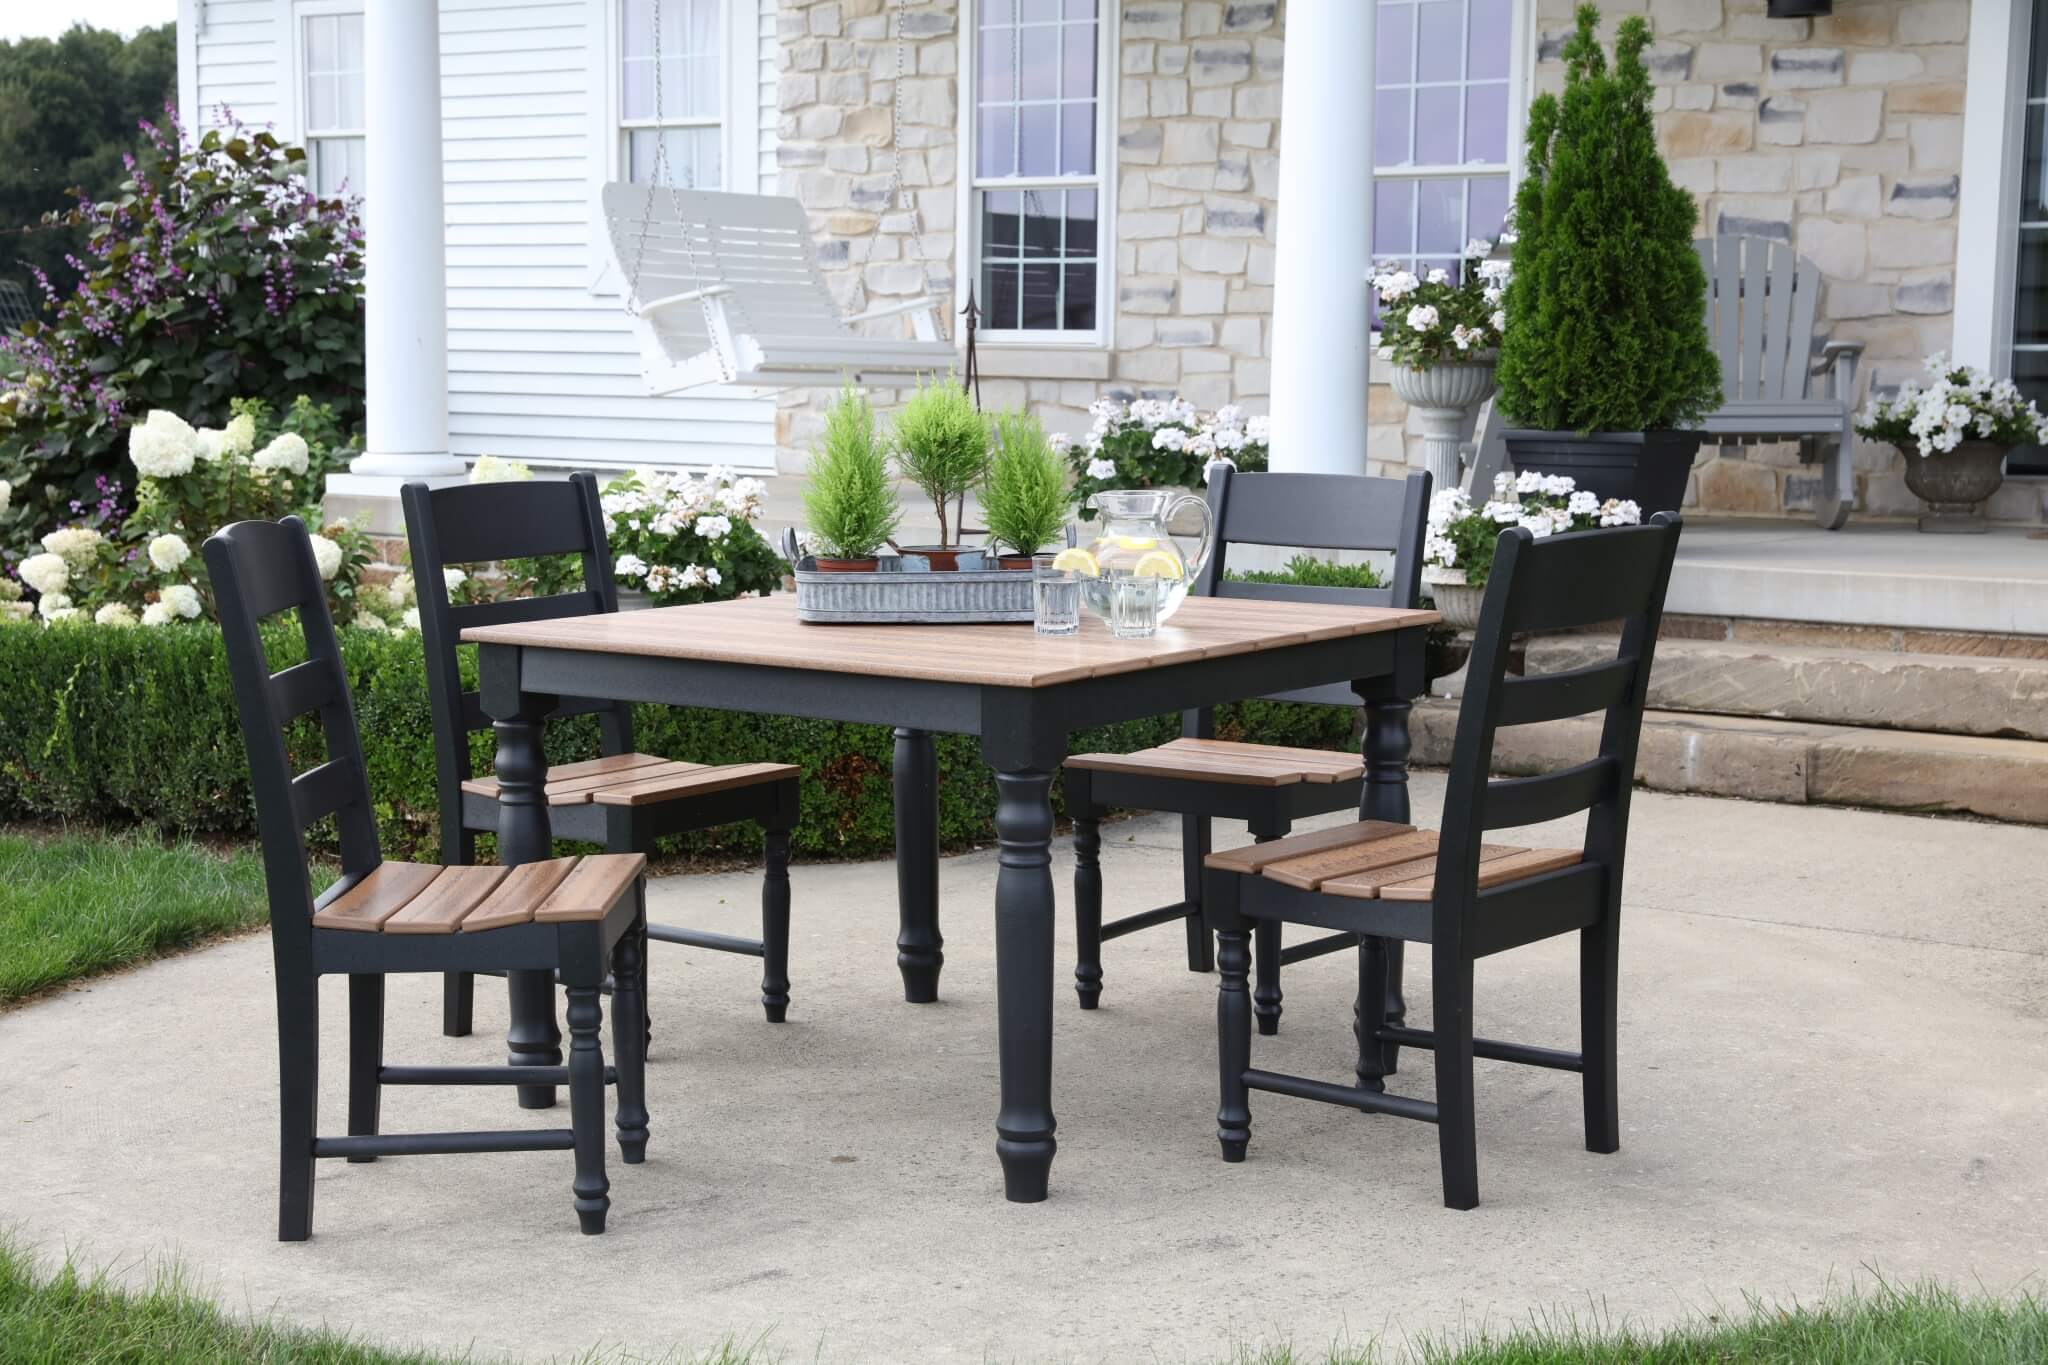 LCC-586 Farm Dining Table Set w/ Chairs